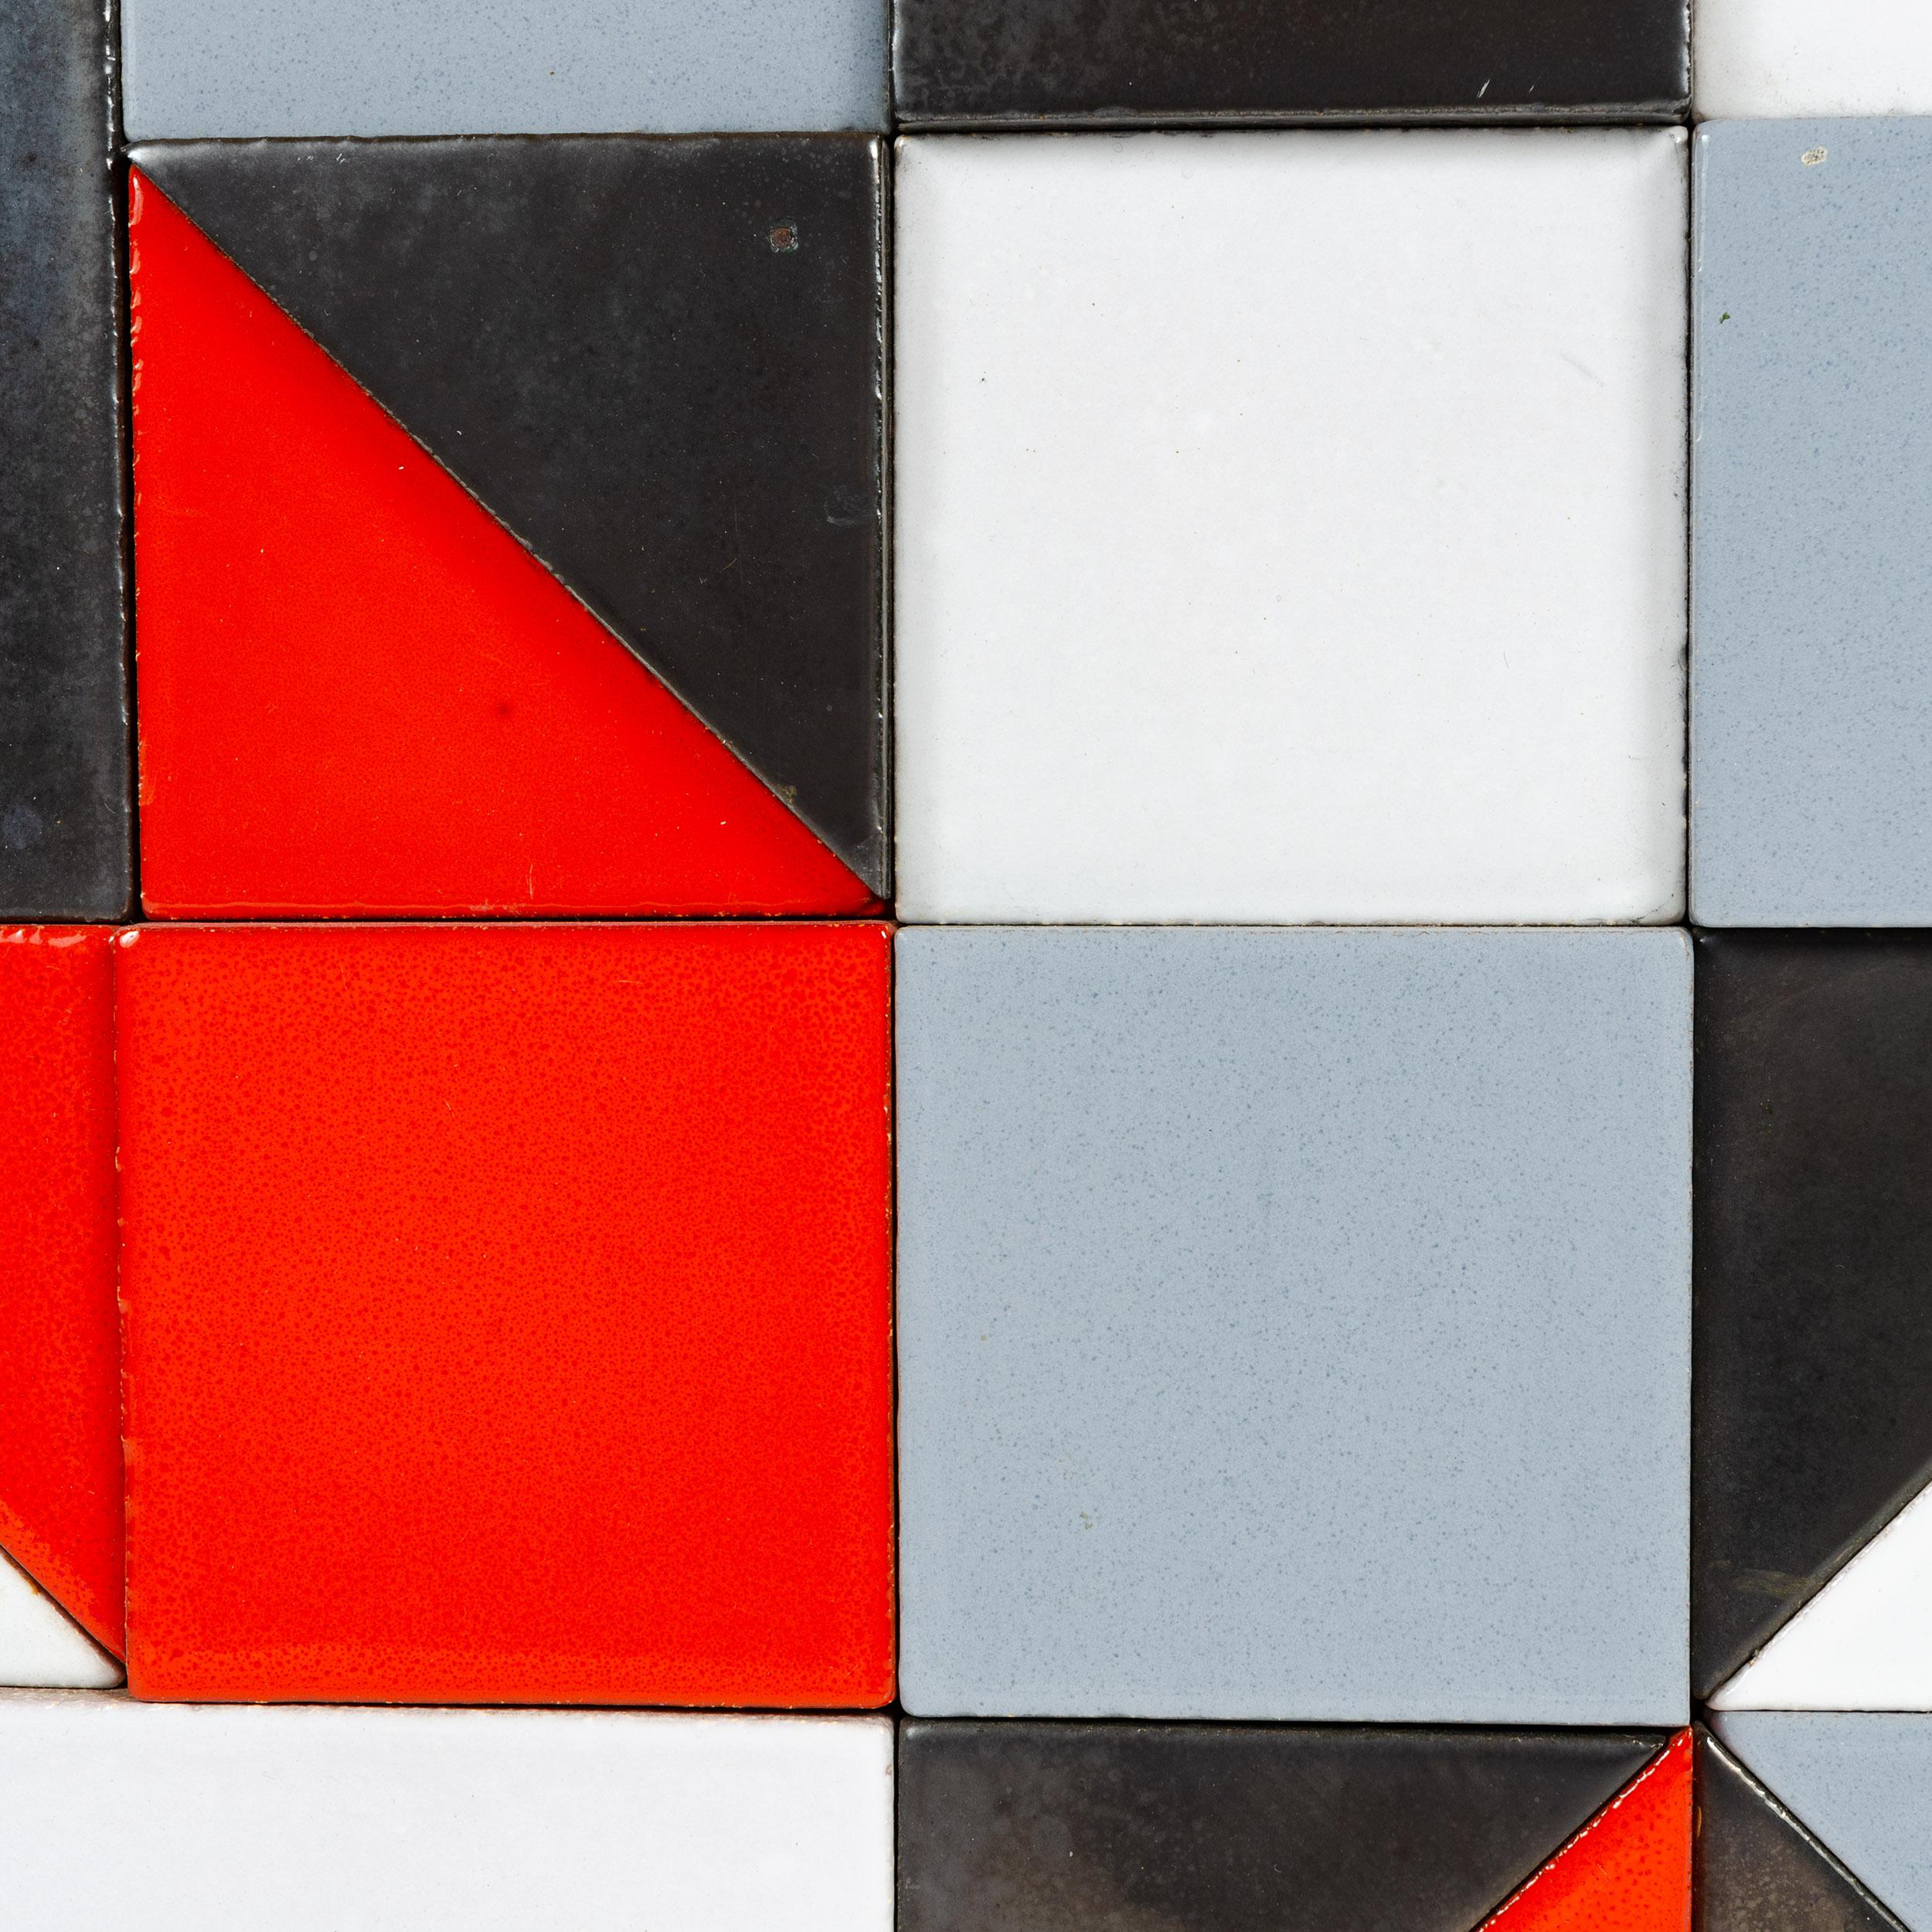 A unique constructivist artwork, comprised of an asymmetrical arrangement of black, white, grey and red-orange ceramic tiles of varying shapes and thicknesses.